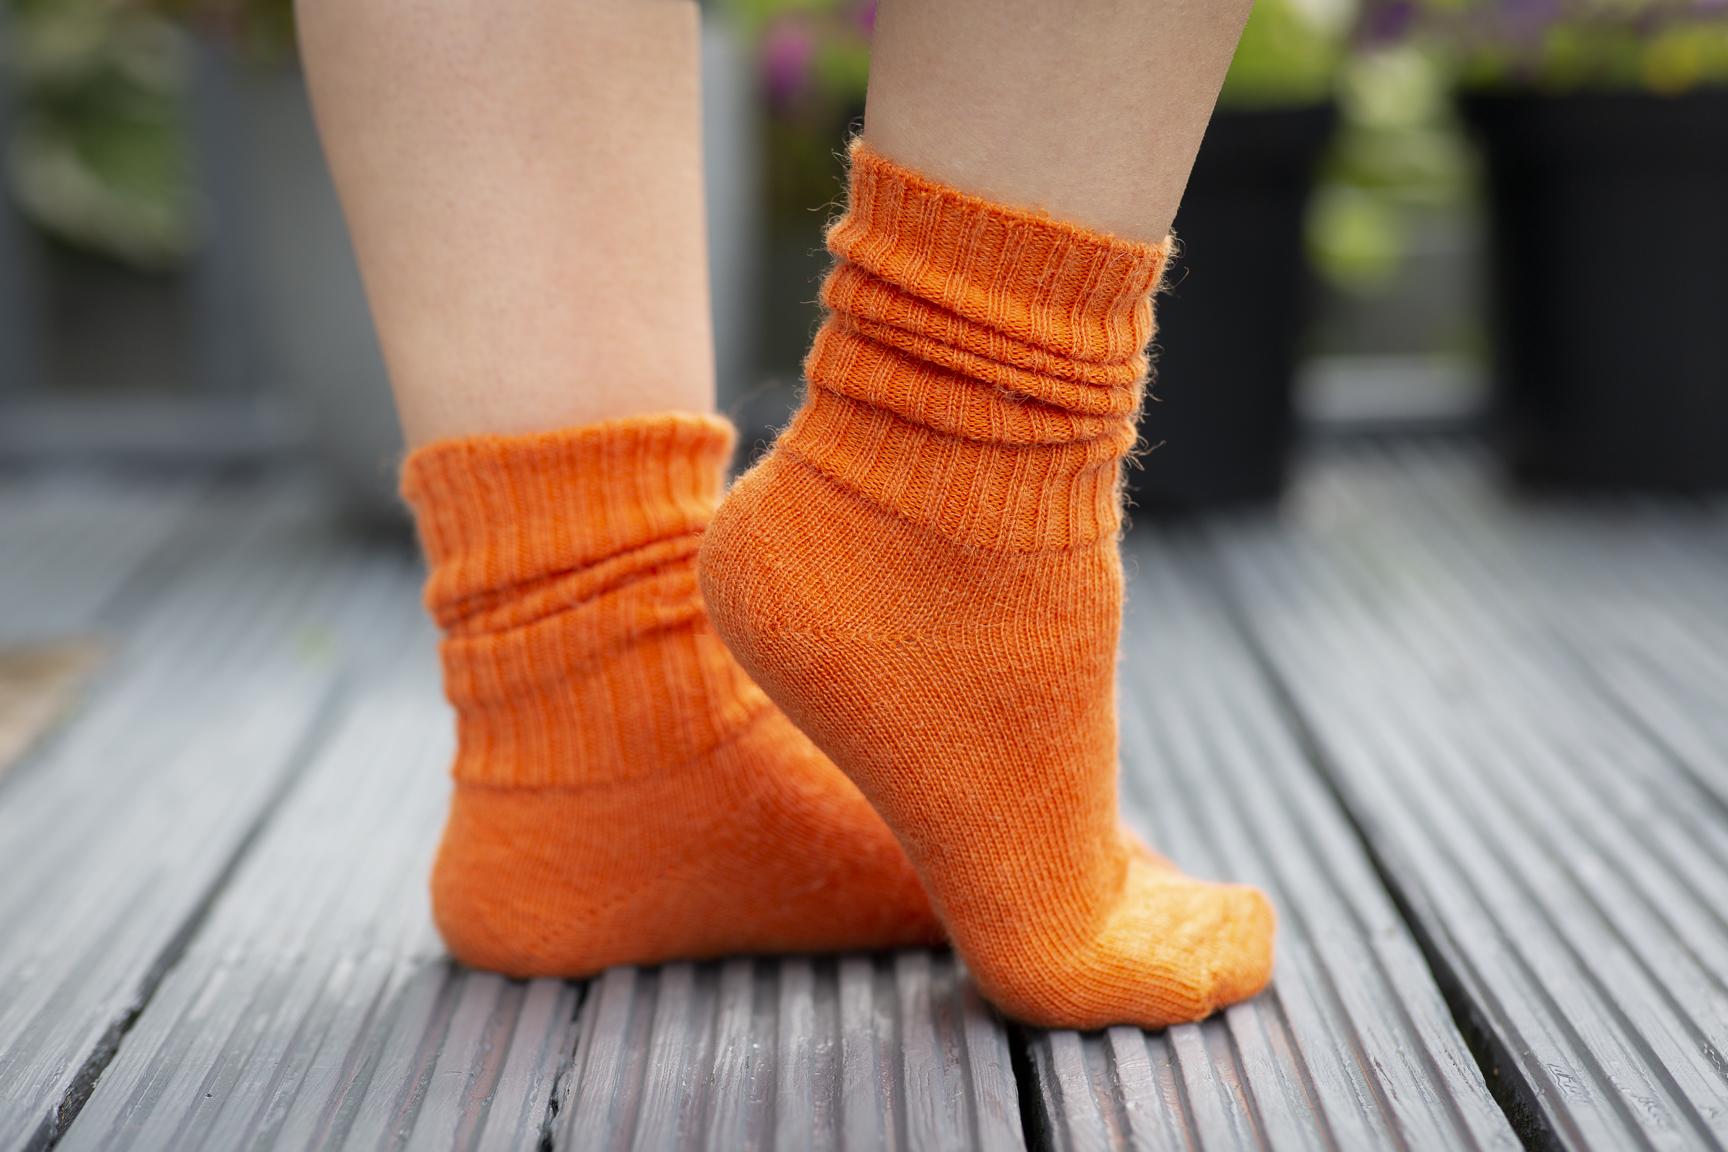 How to choose walking socks: What to look for before buying hiking socks